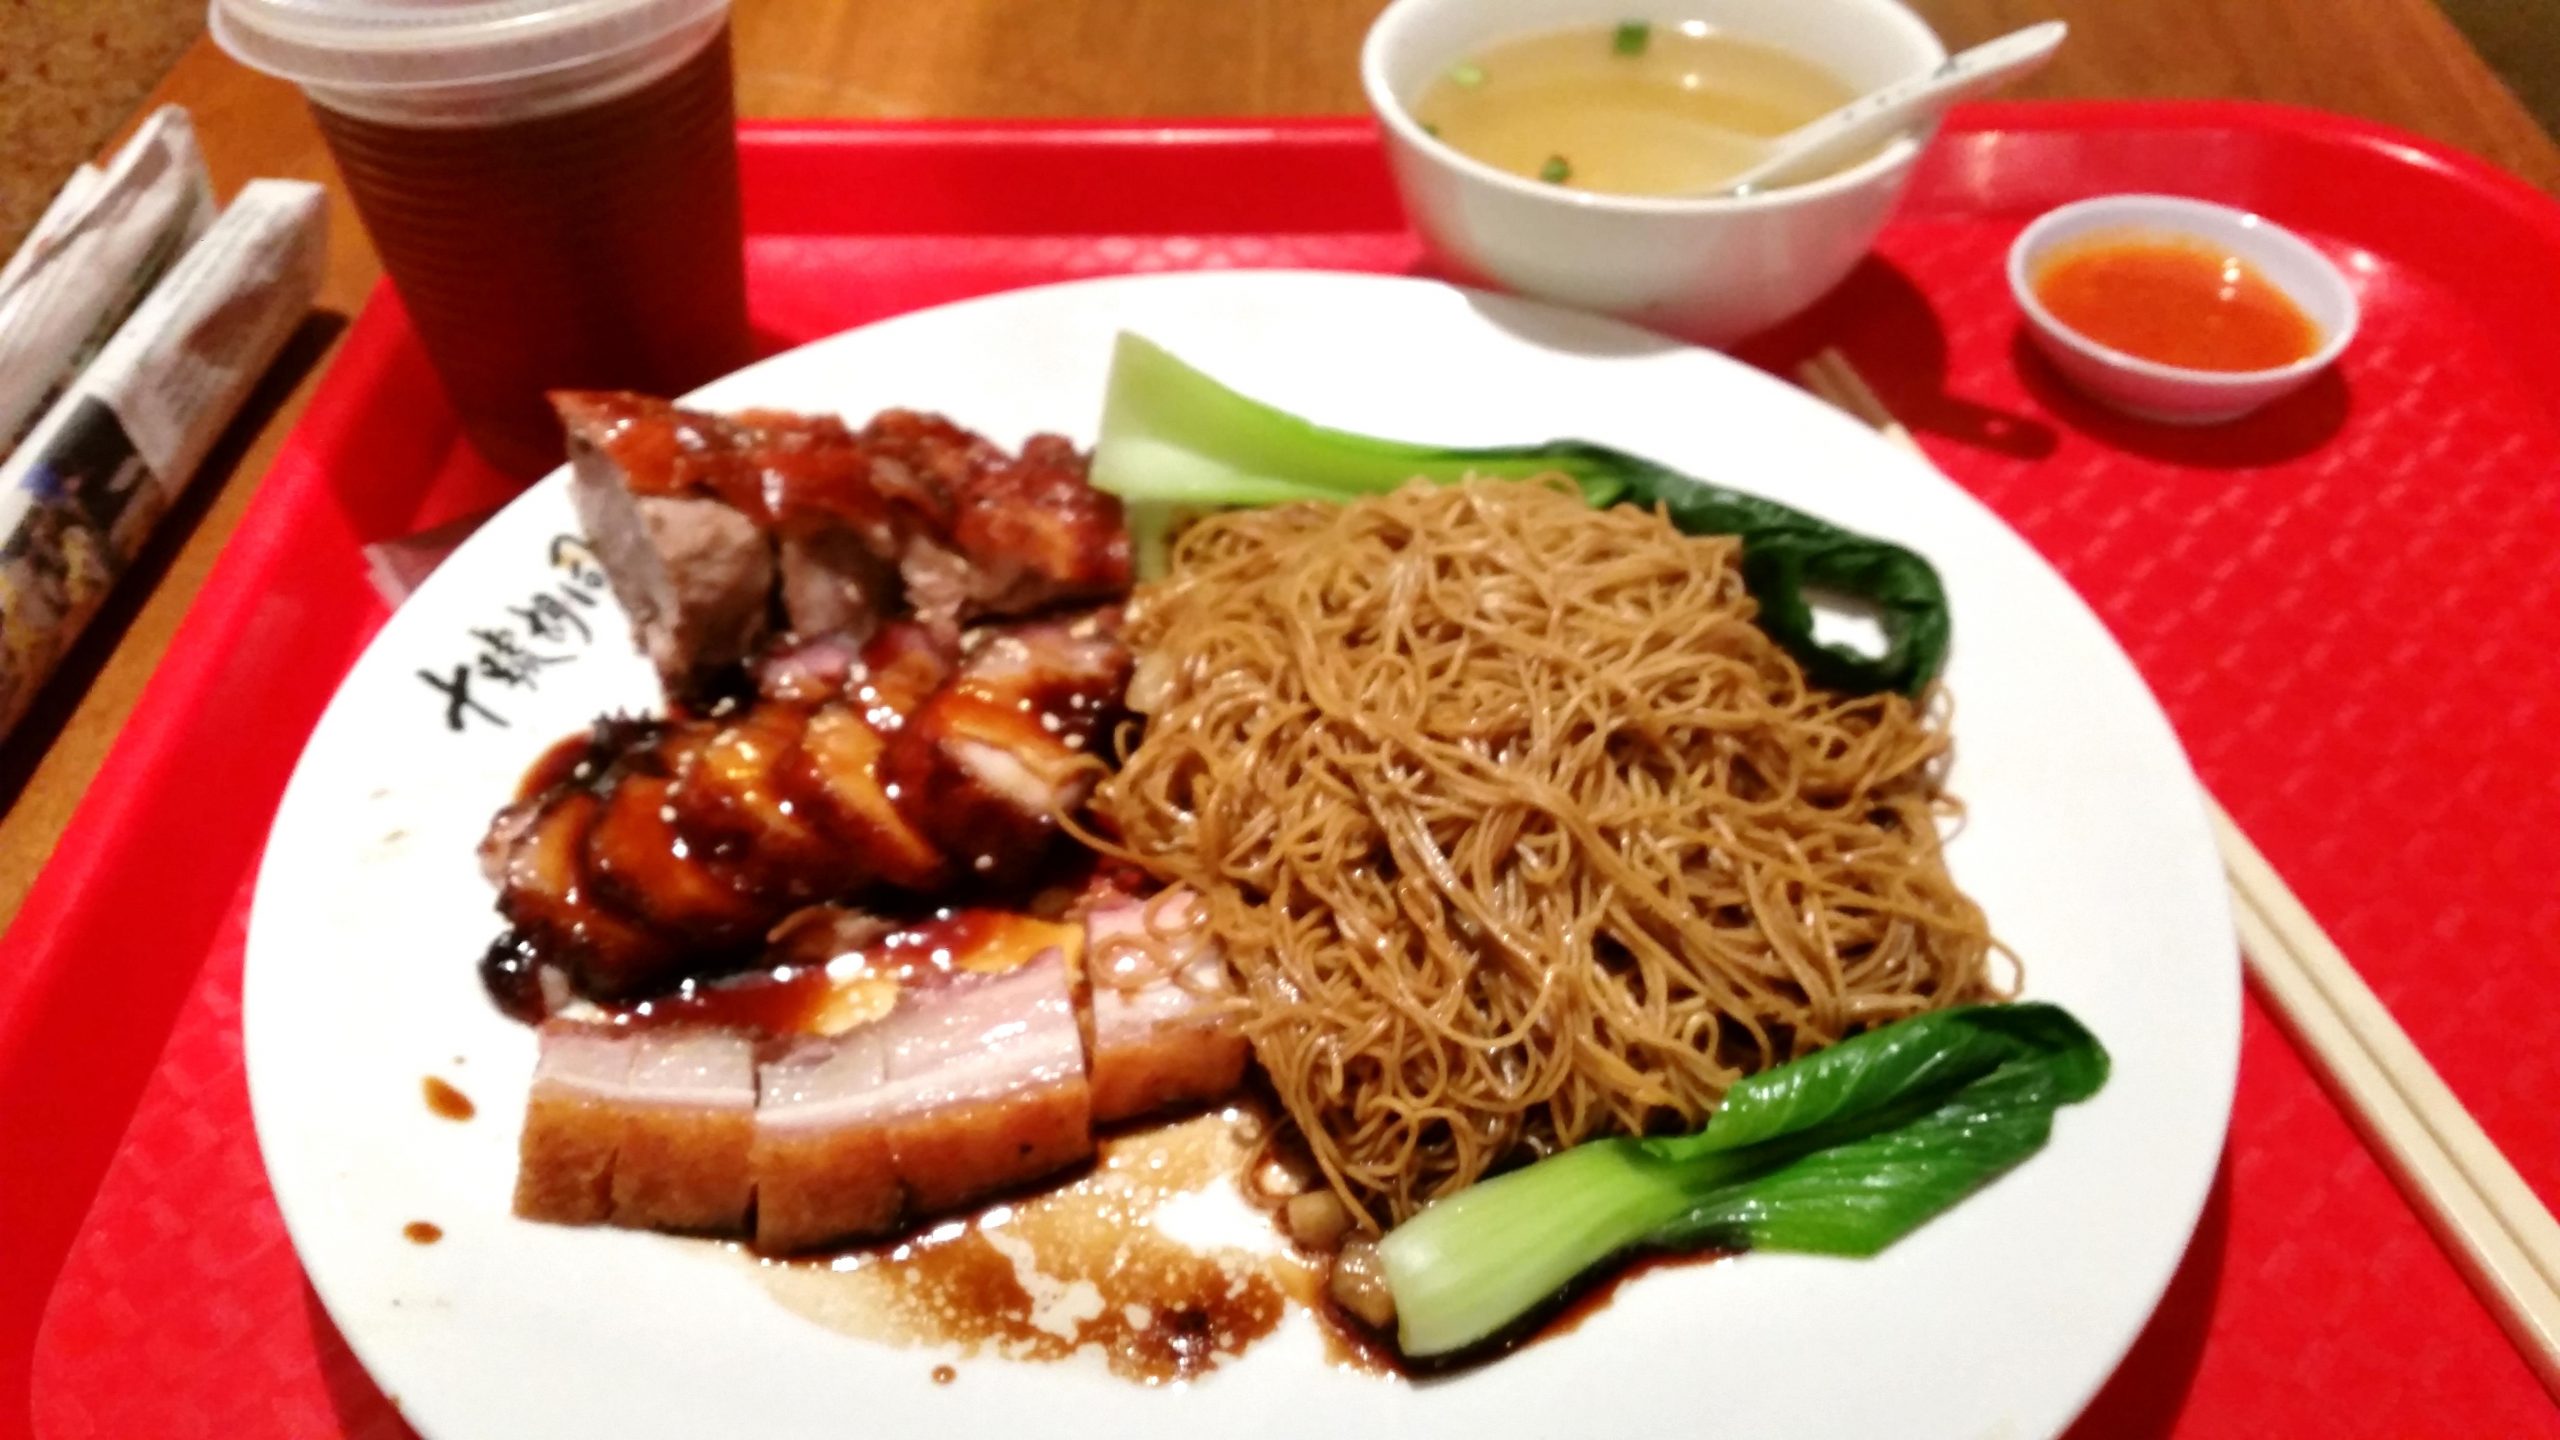 Char sio served with wonton noodles and soup